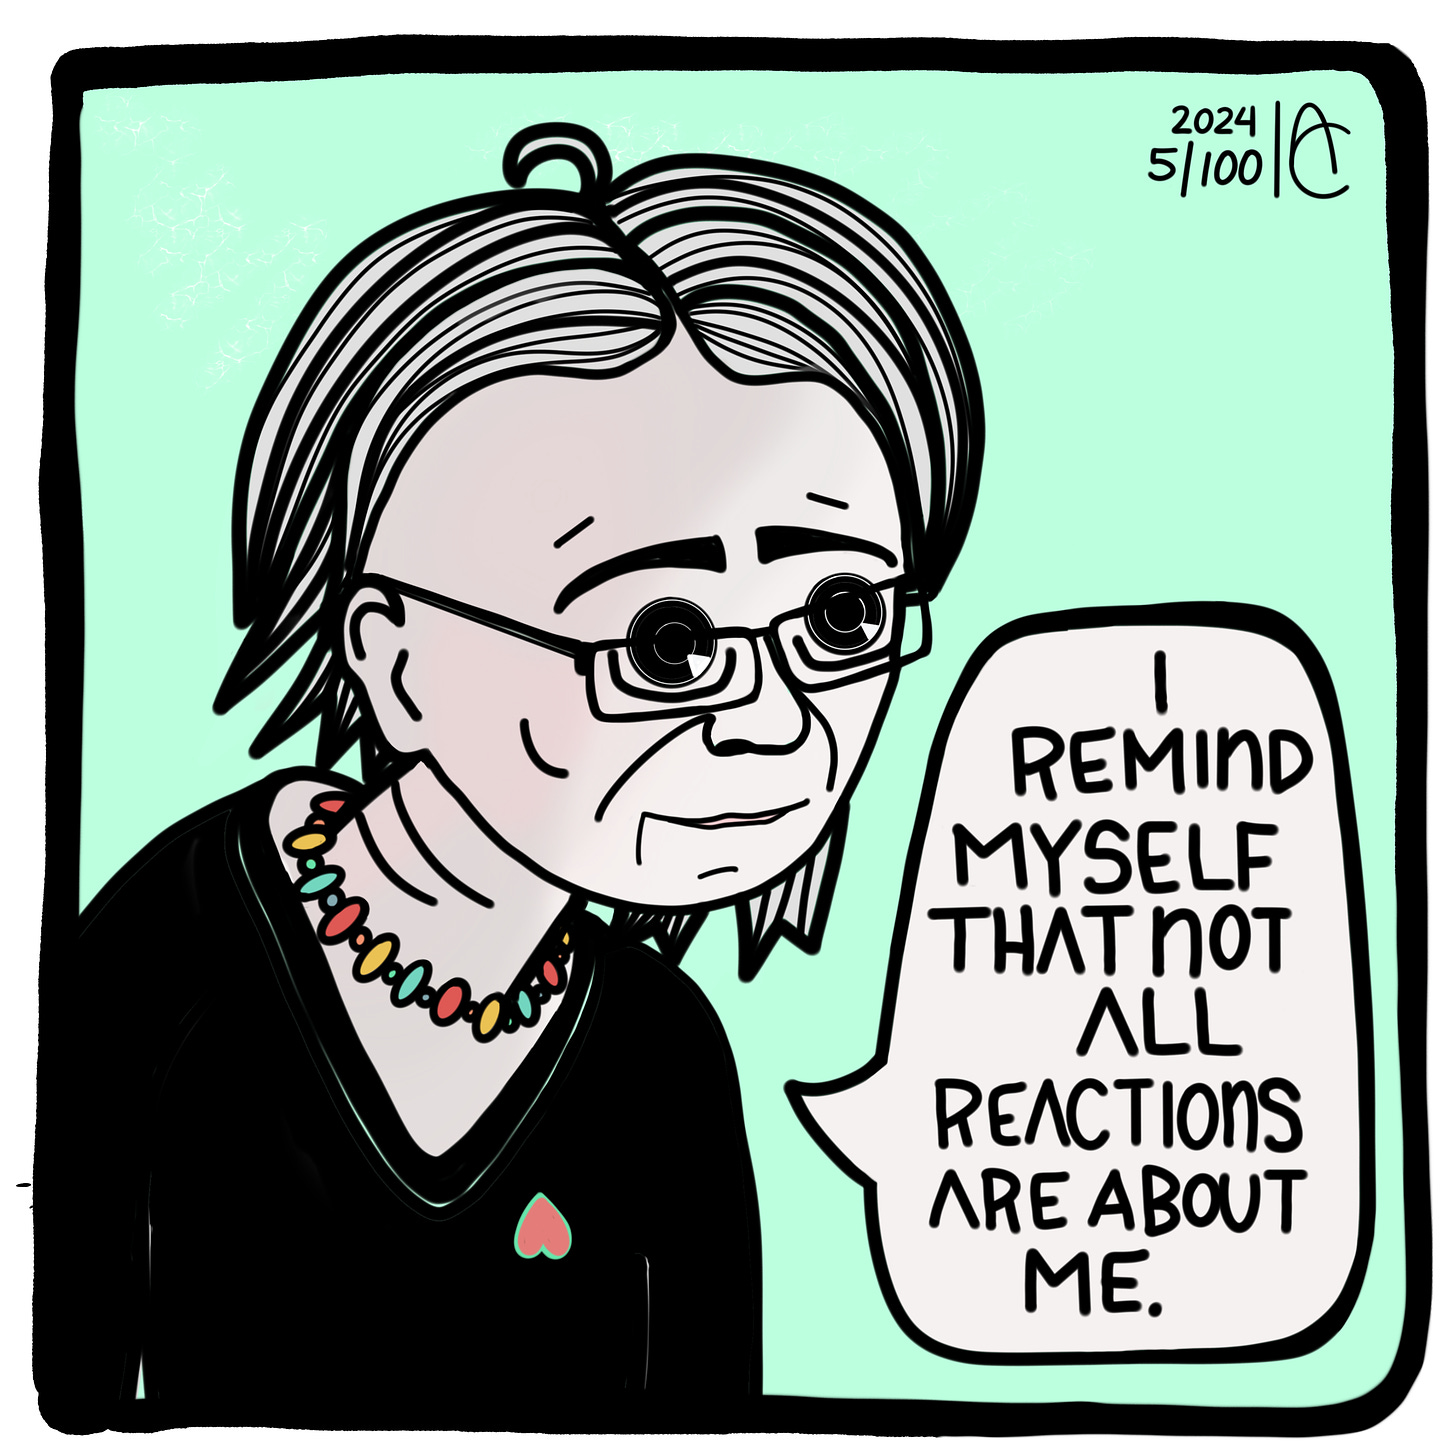 5/100: I remind myself that not all reactions are about me.- Self portrait comic with affirmation by Amy Cowen